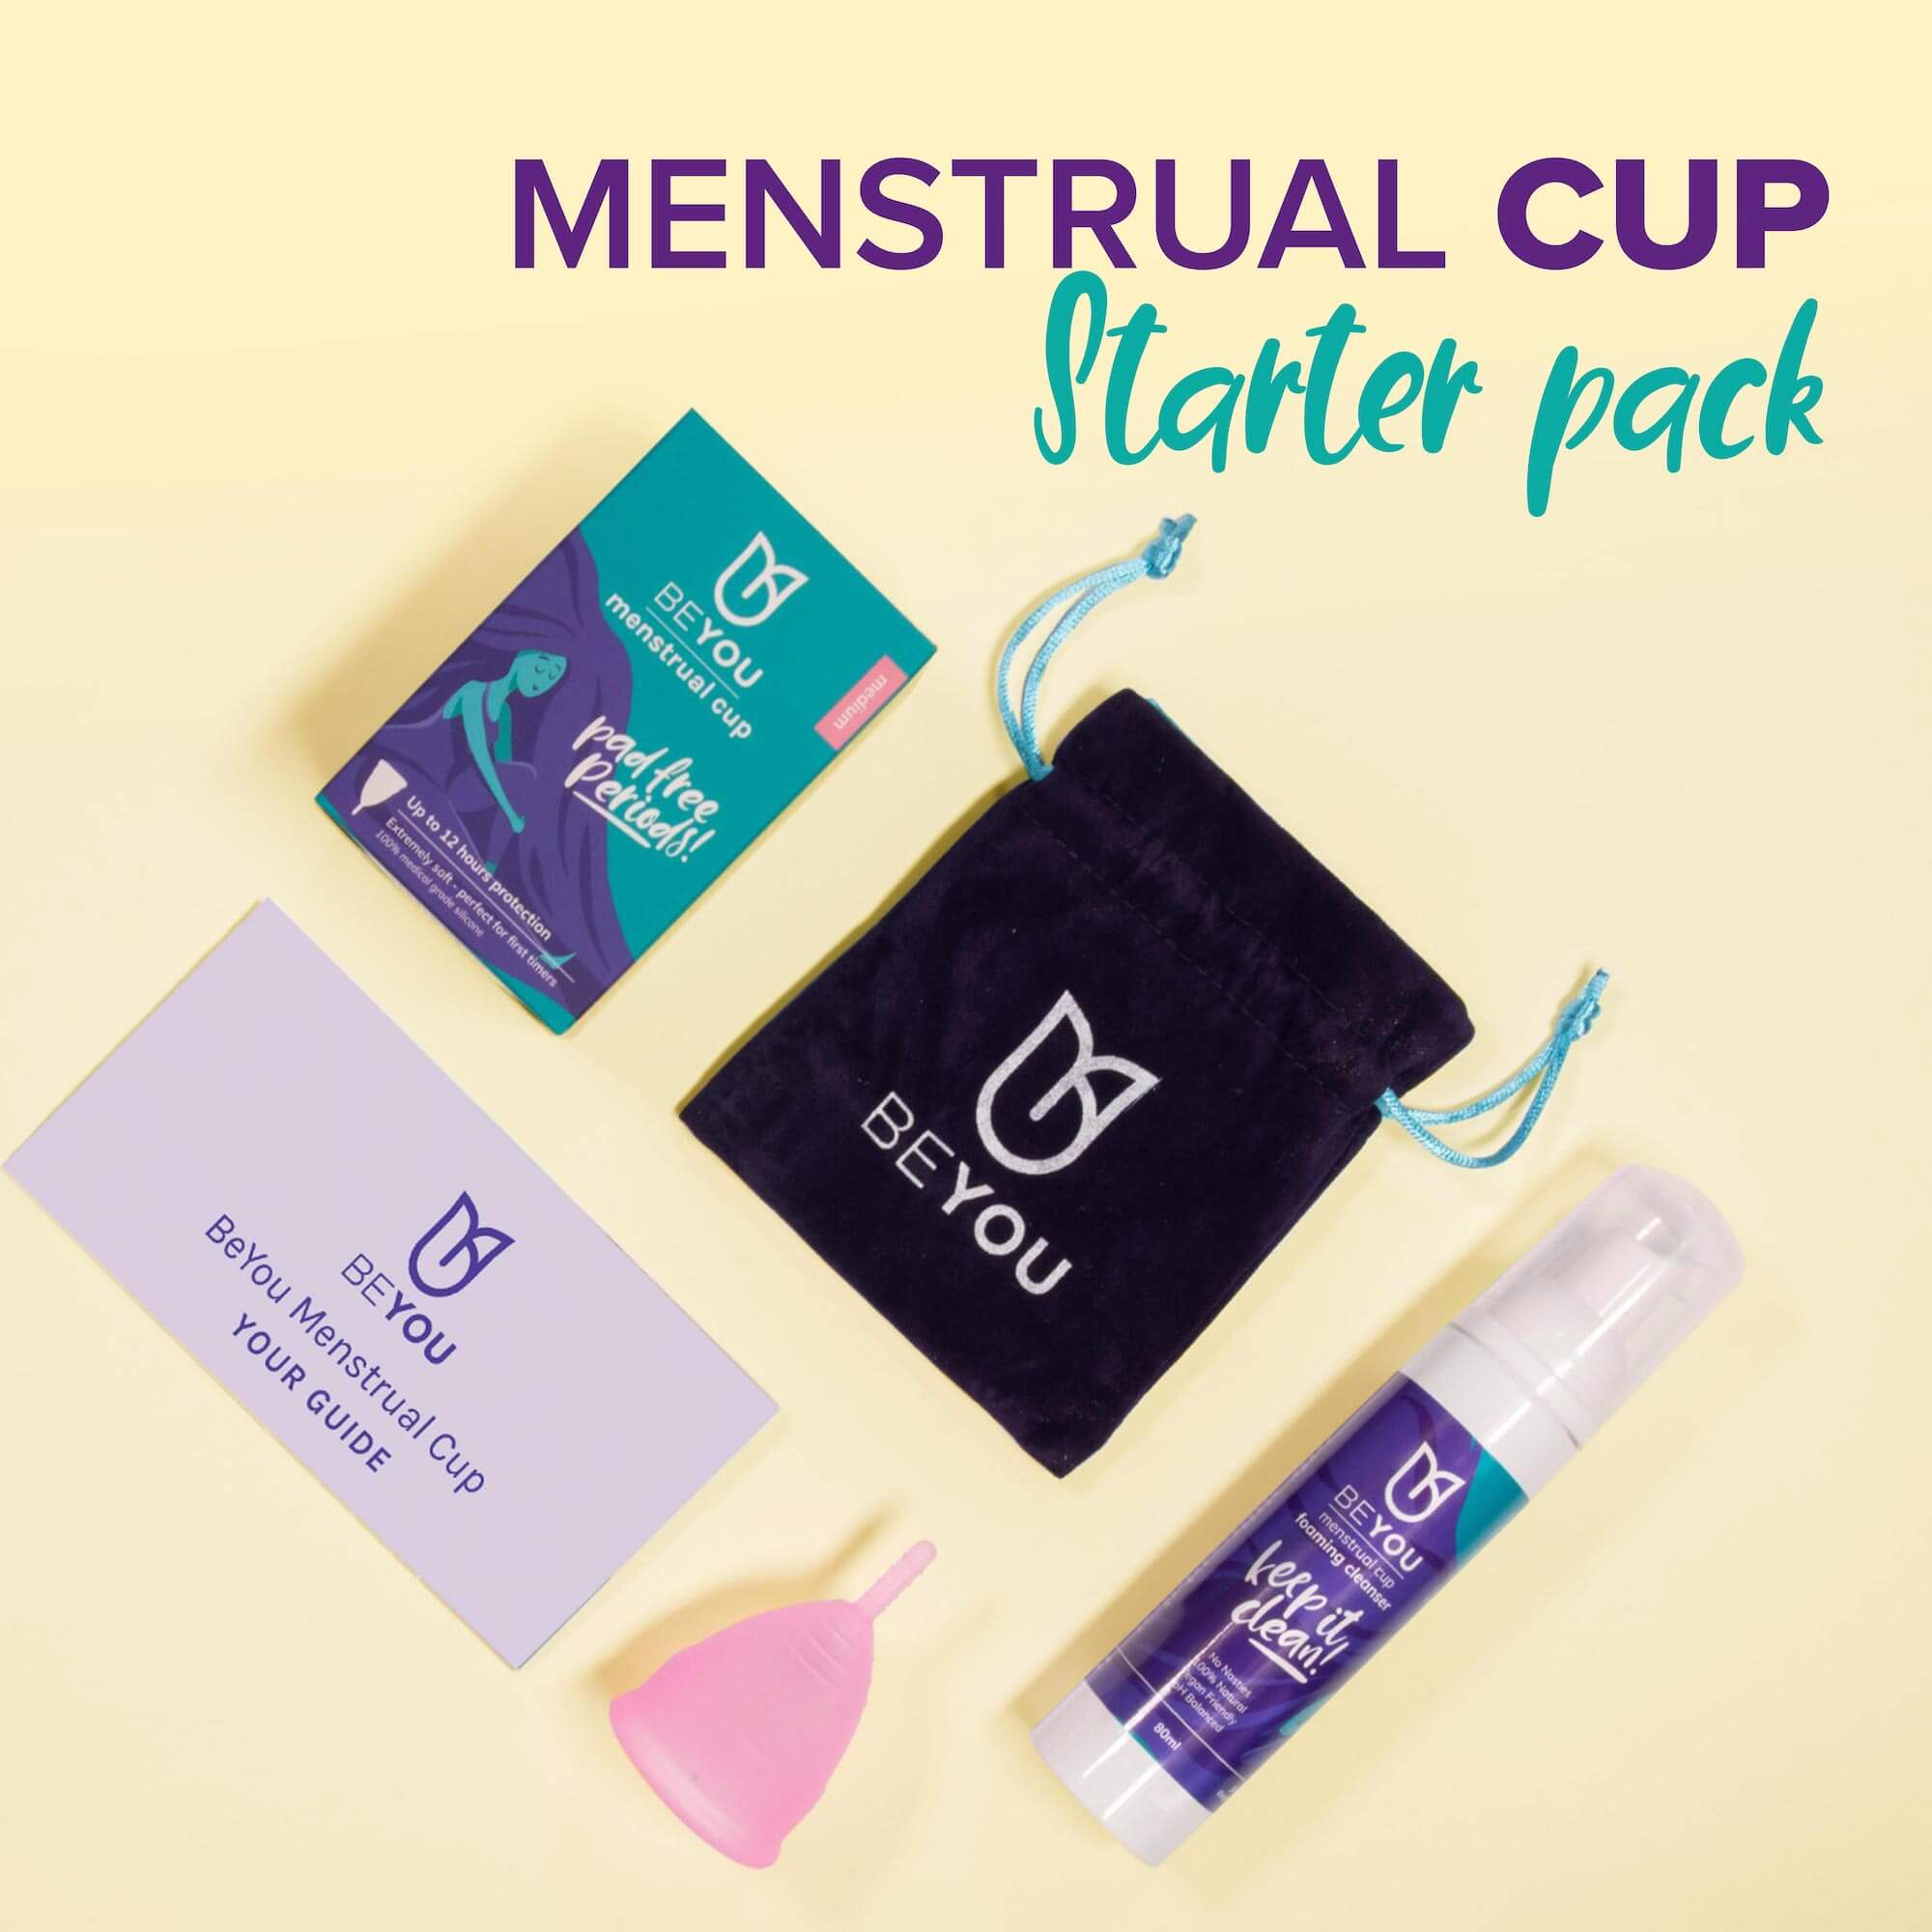 menstrual cup starter pack comes with the menstrual cup and menstrual cup foaming cleanser